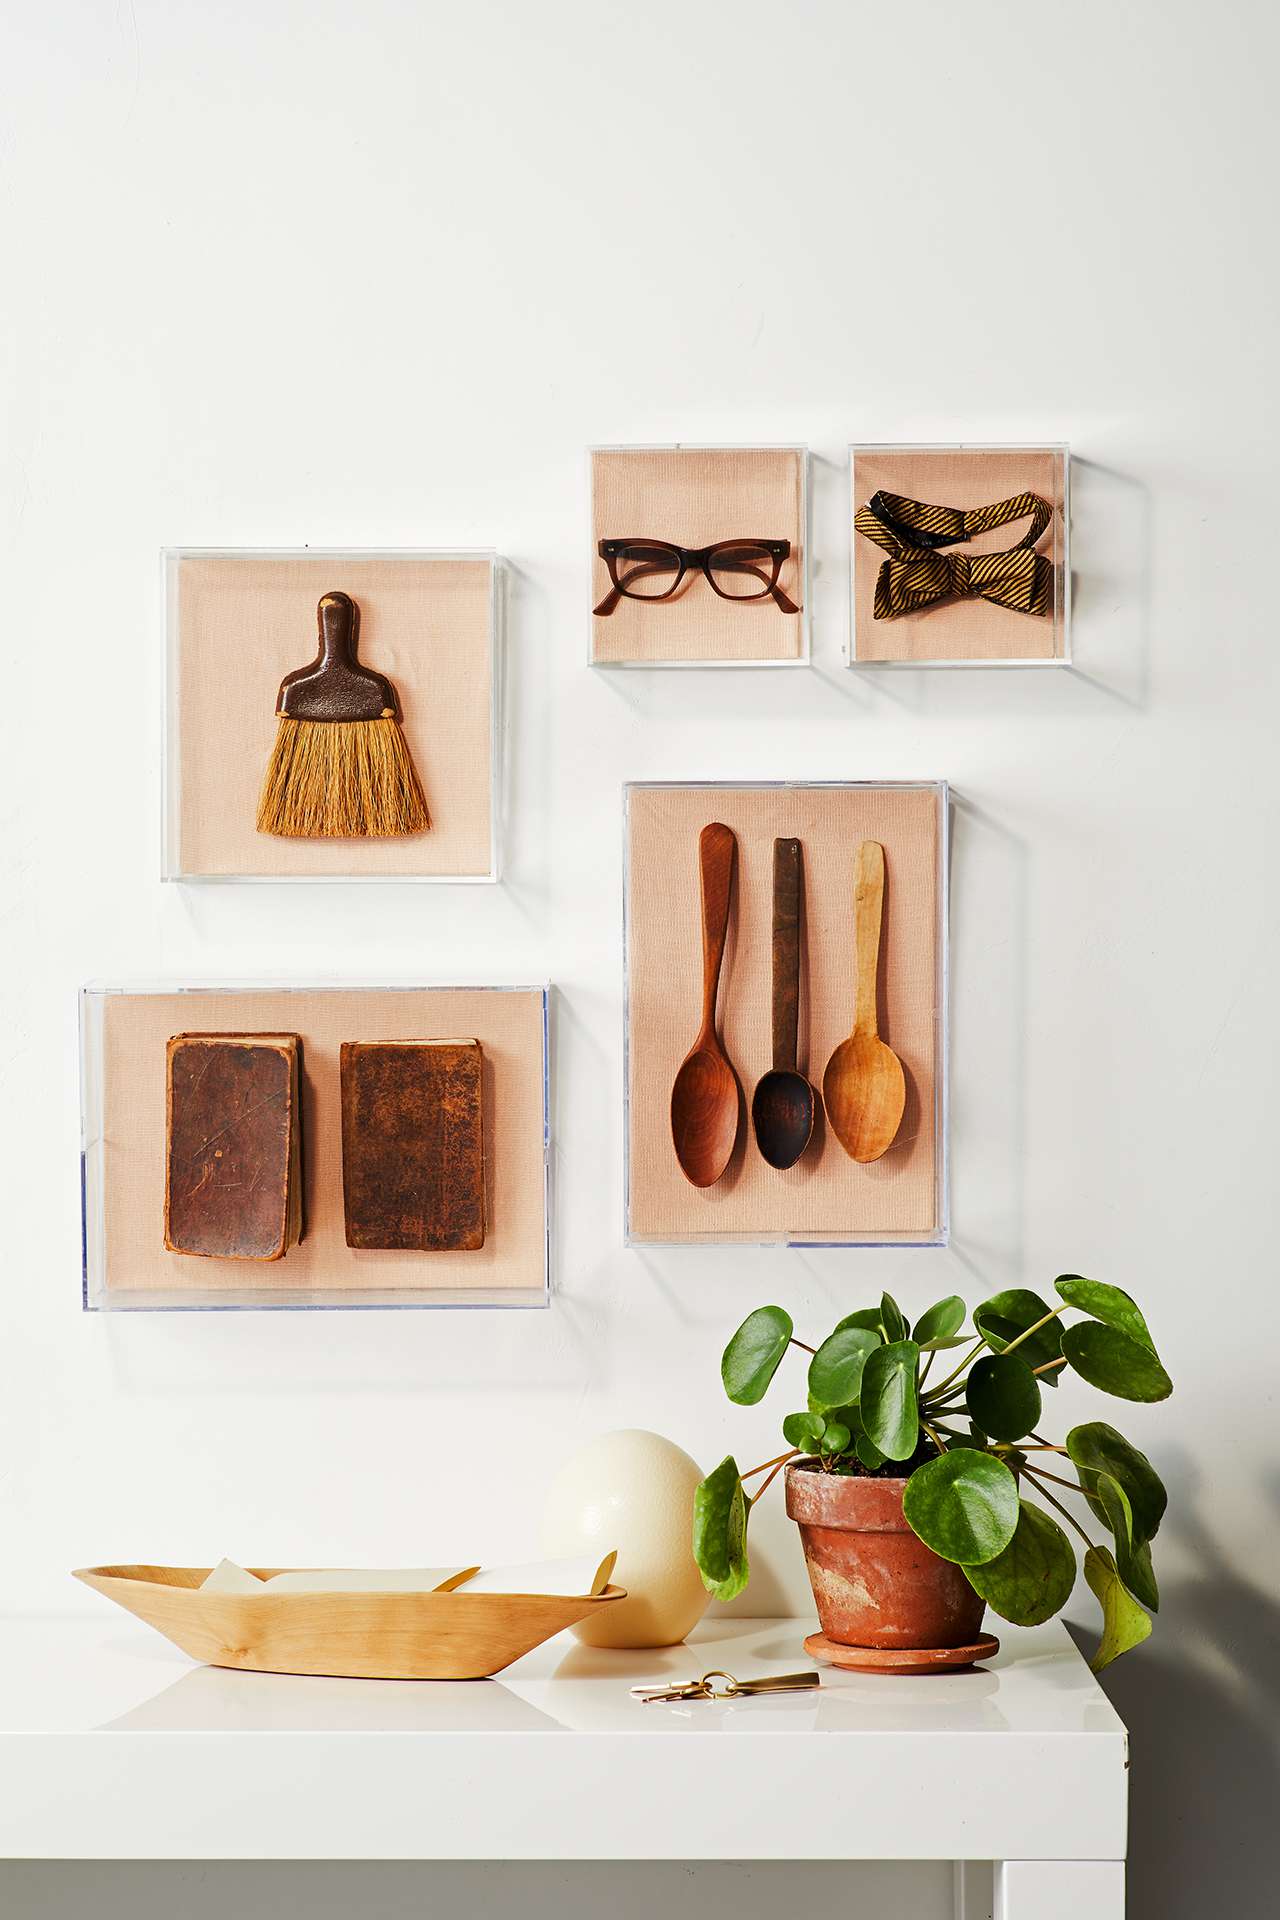 hanging wall decorations heirlooms in shadow boxes